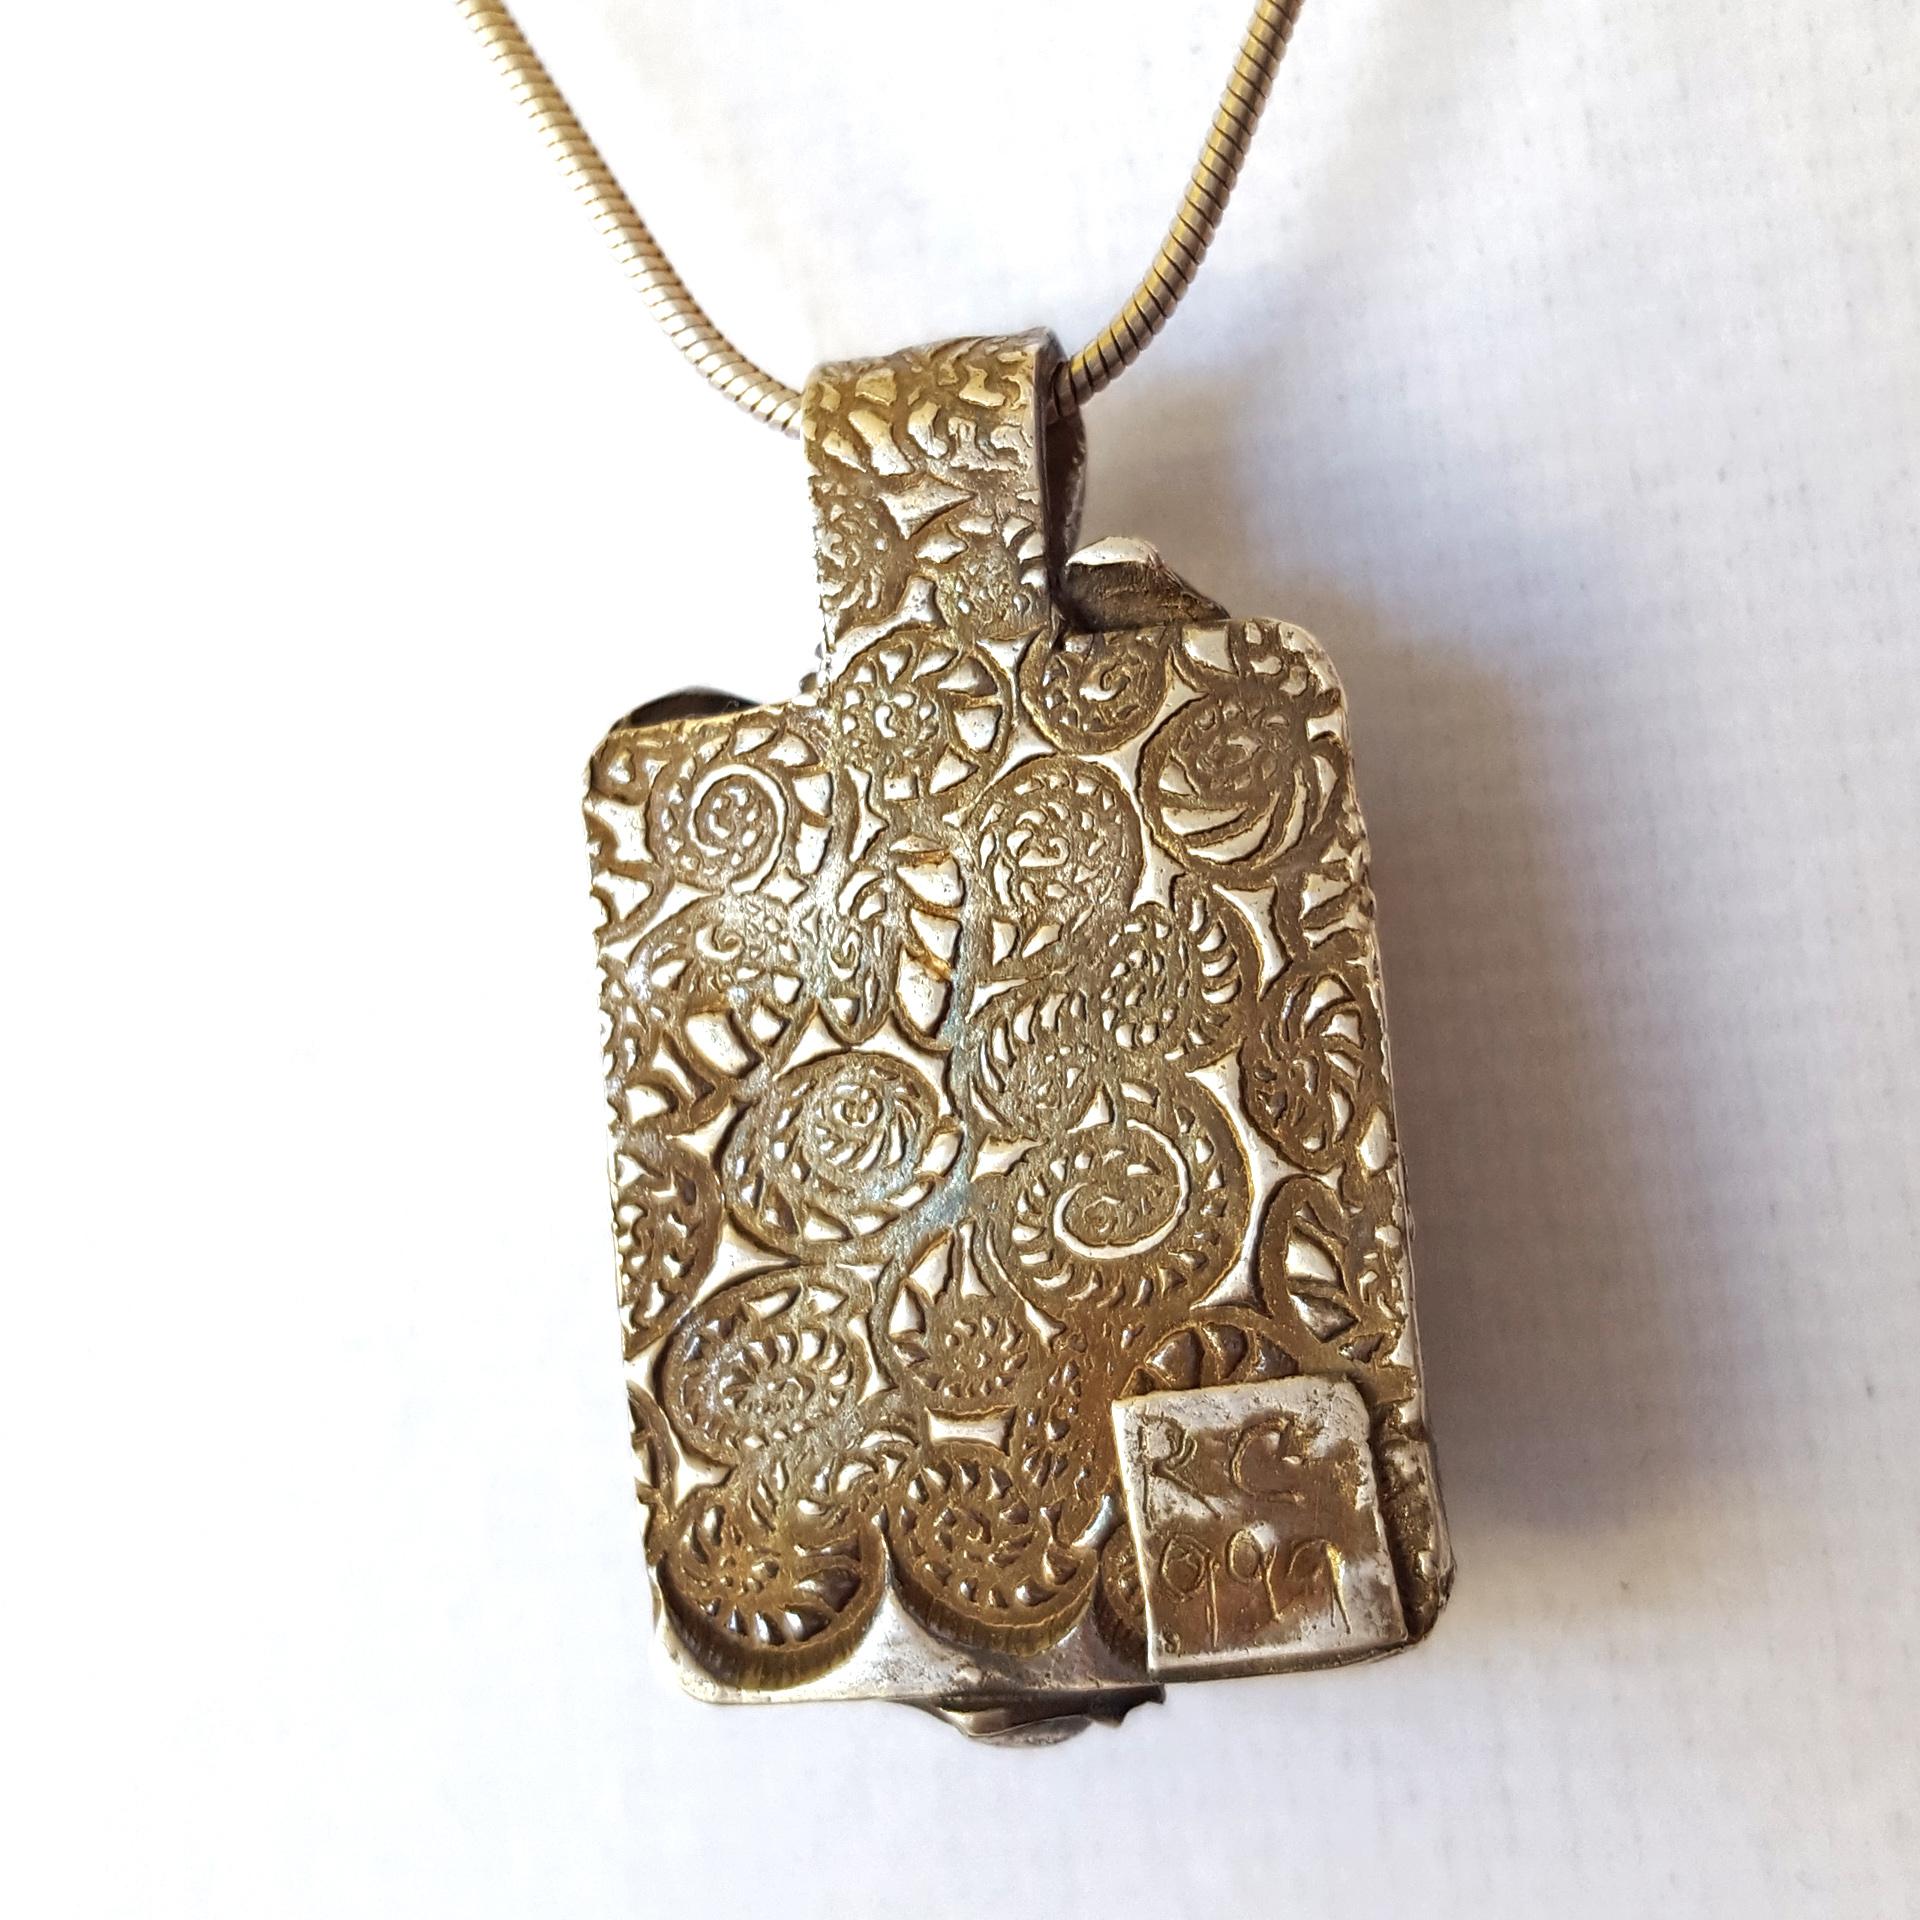 Dichroic and Silver Pendant Necklace